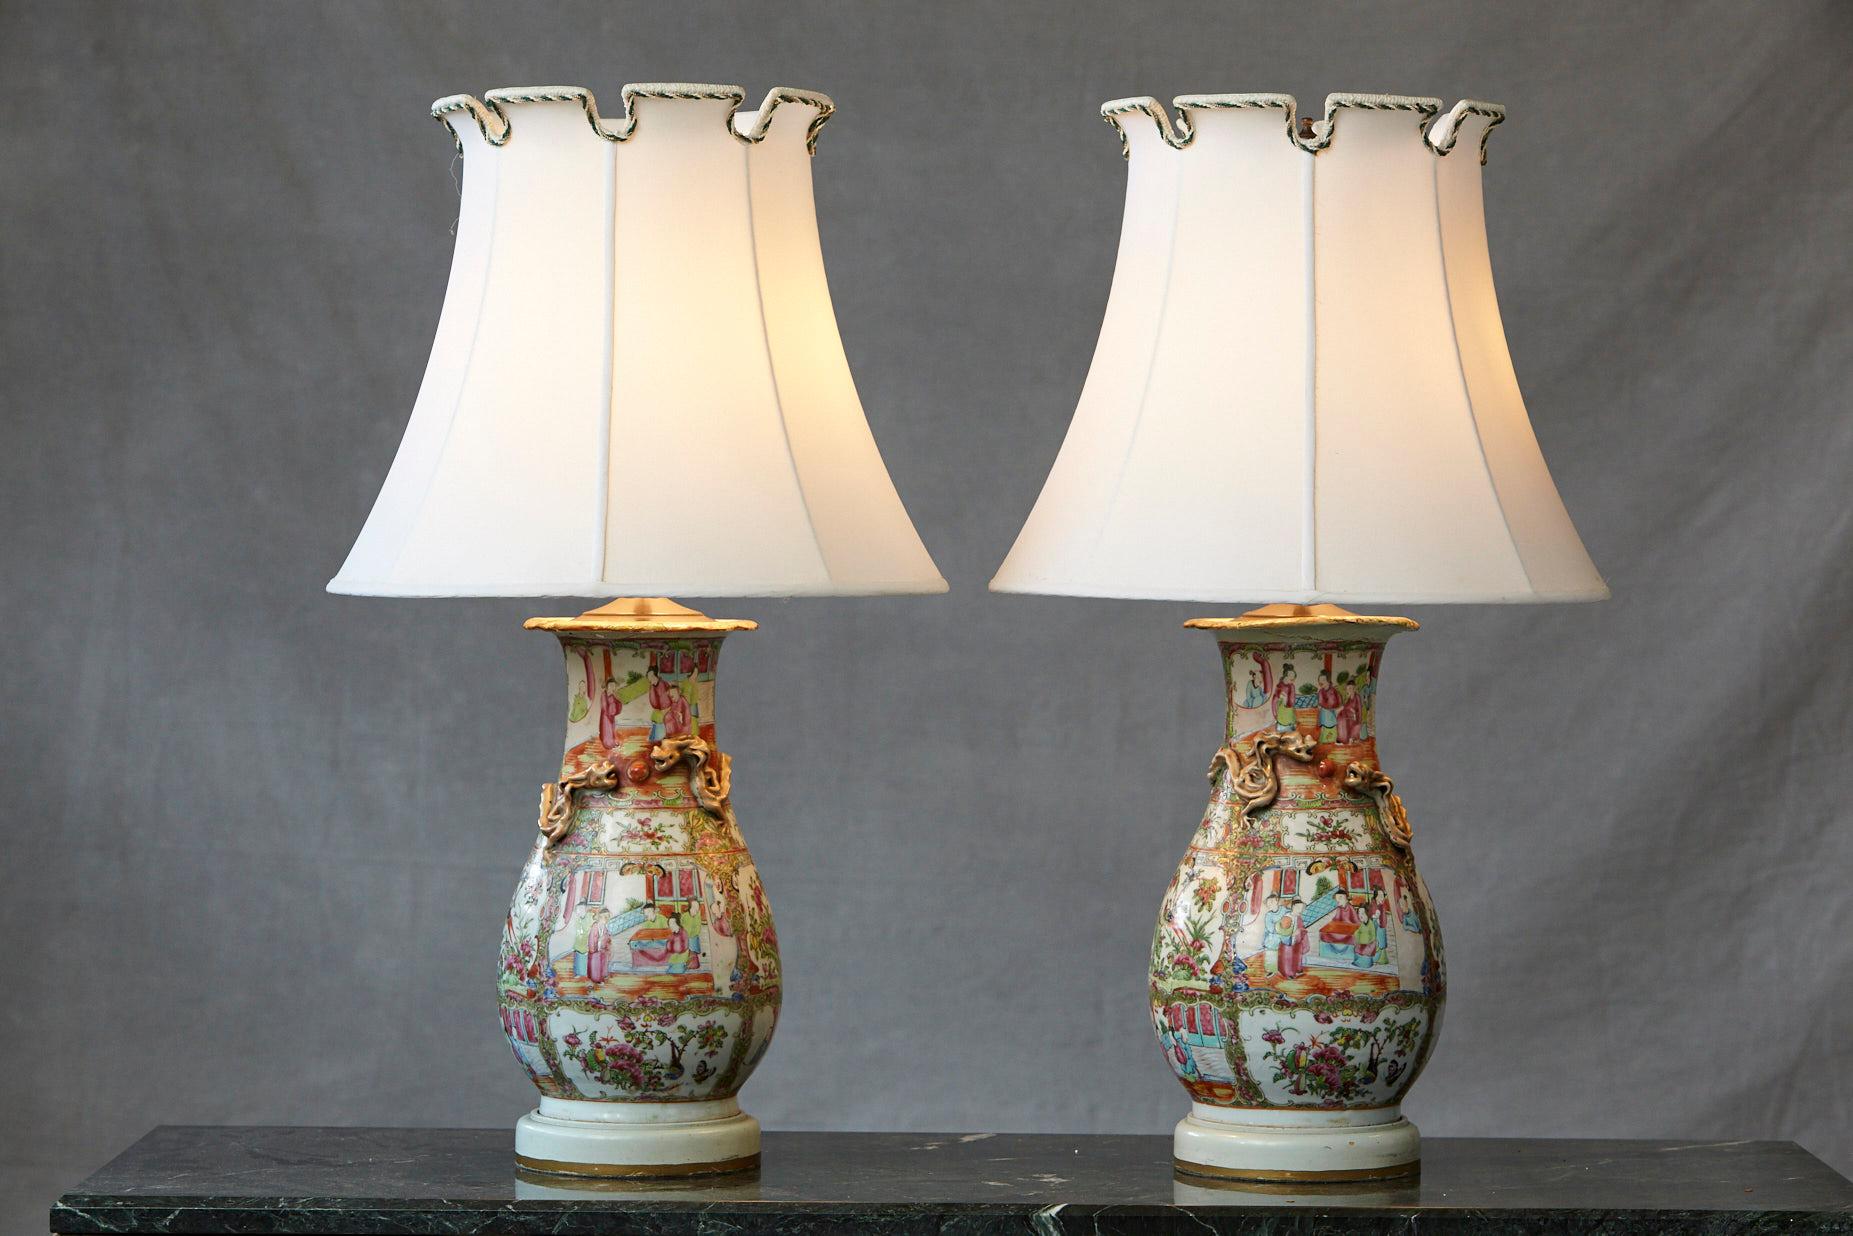 Impressive pair of late 19th century hand painted Chinese porcelain vase style table lamps, depicting in great detail traditional Chinese scenes from people's daily life, birds, nature and elaborated flower arrangements. Each vase has two porcelain